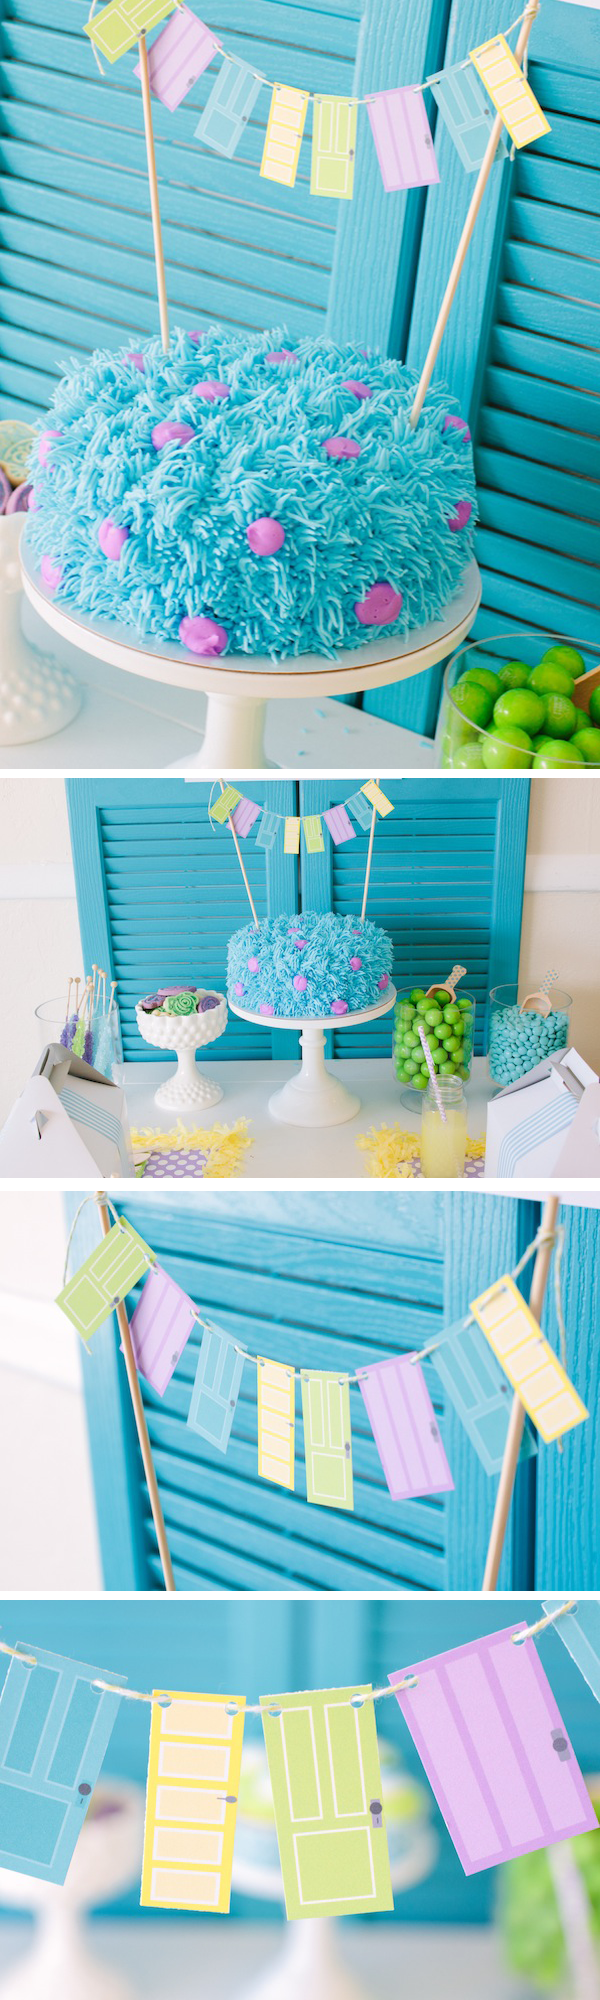 Monsters Inc Sulley Cake